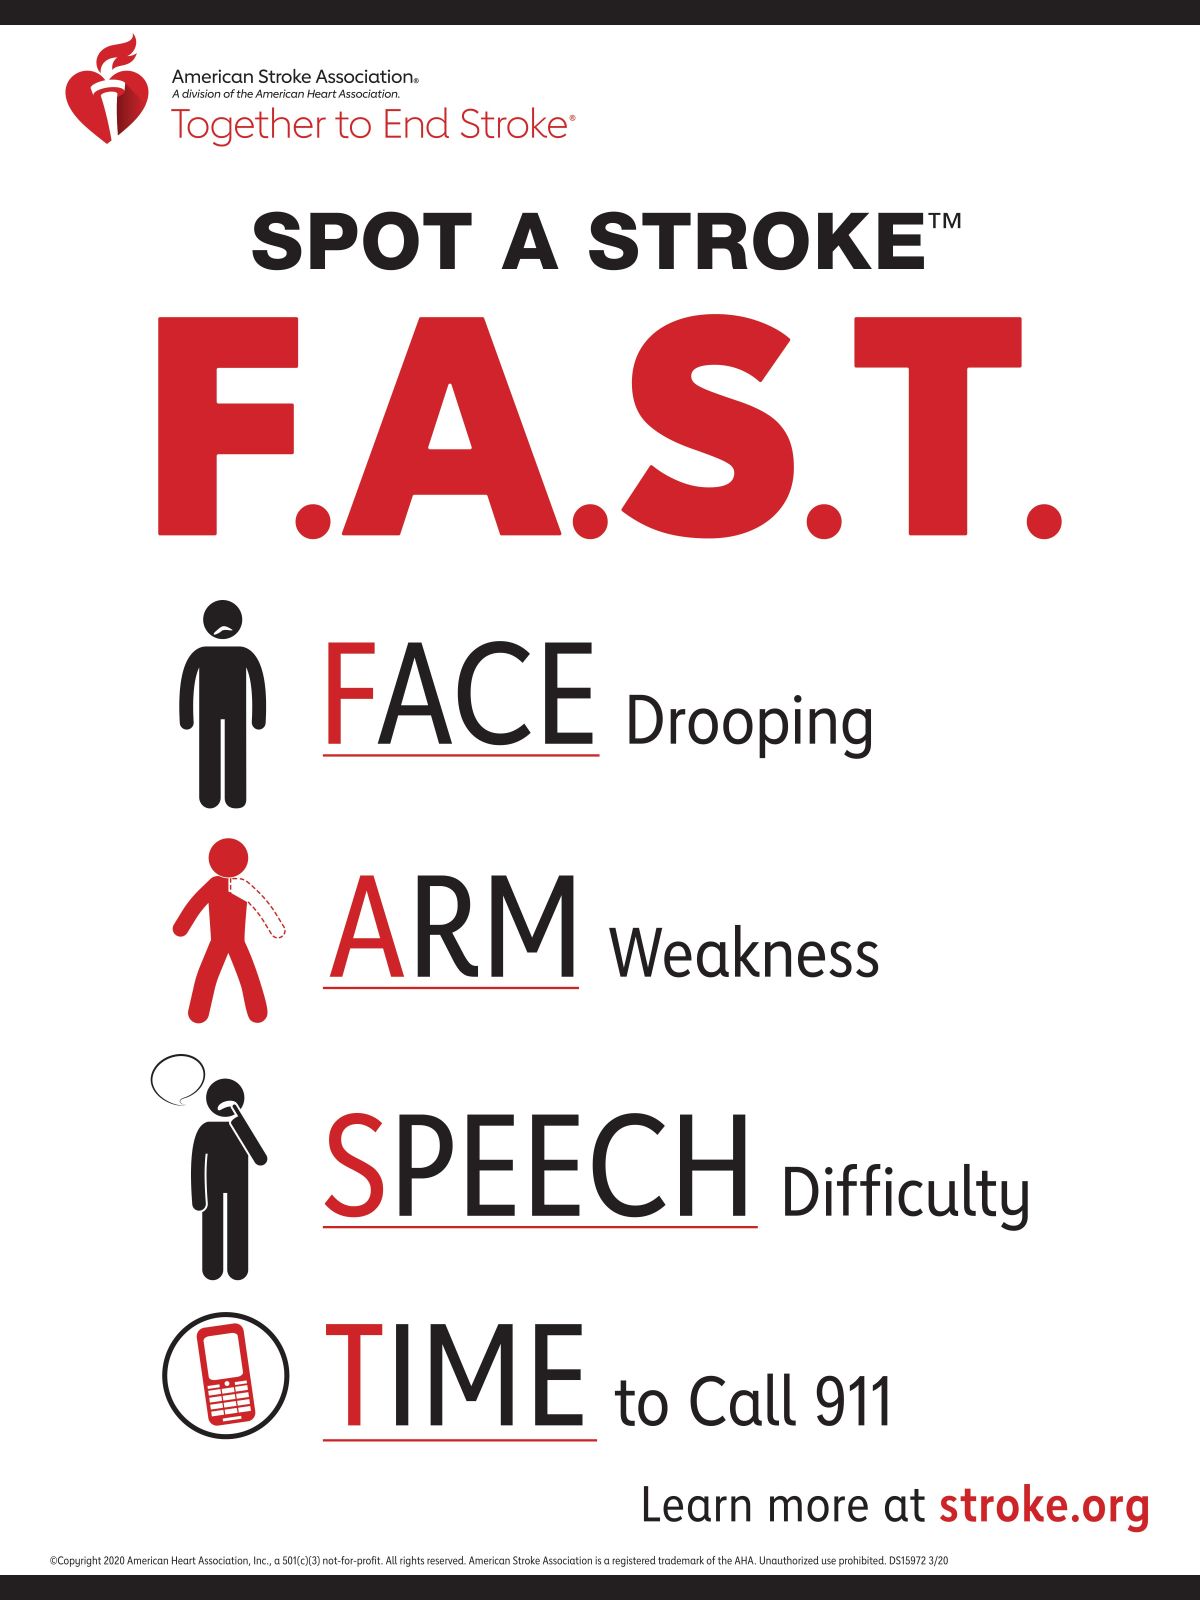 Spot a stroke. F.A.S.T - Face Drooping, Arm Weakness, Speech Difficulty, Time to Call 911